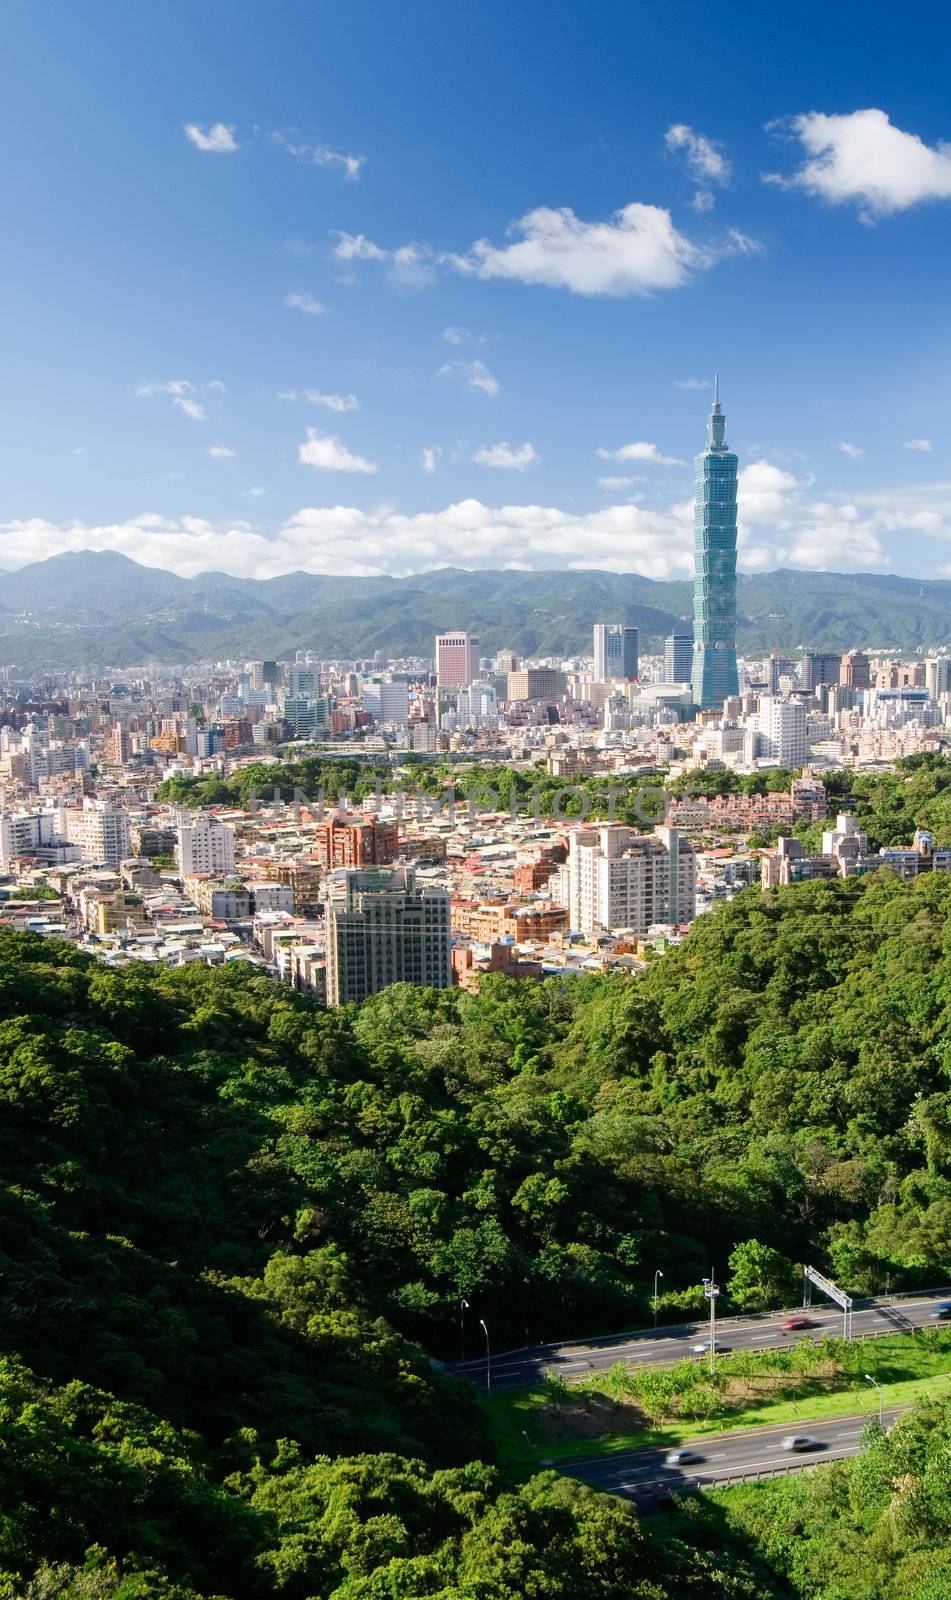 It is a beautiful cityscape in Taipei of Taiwan.